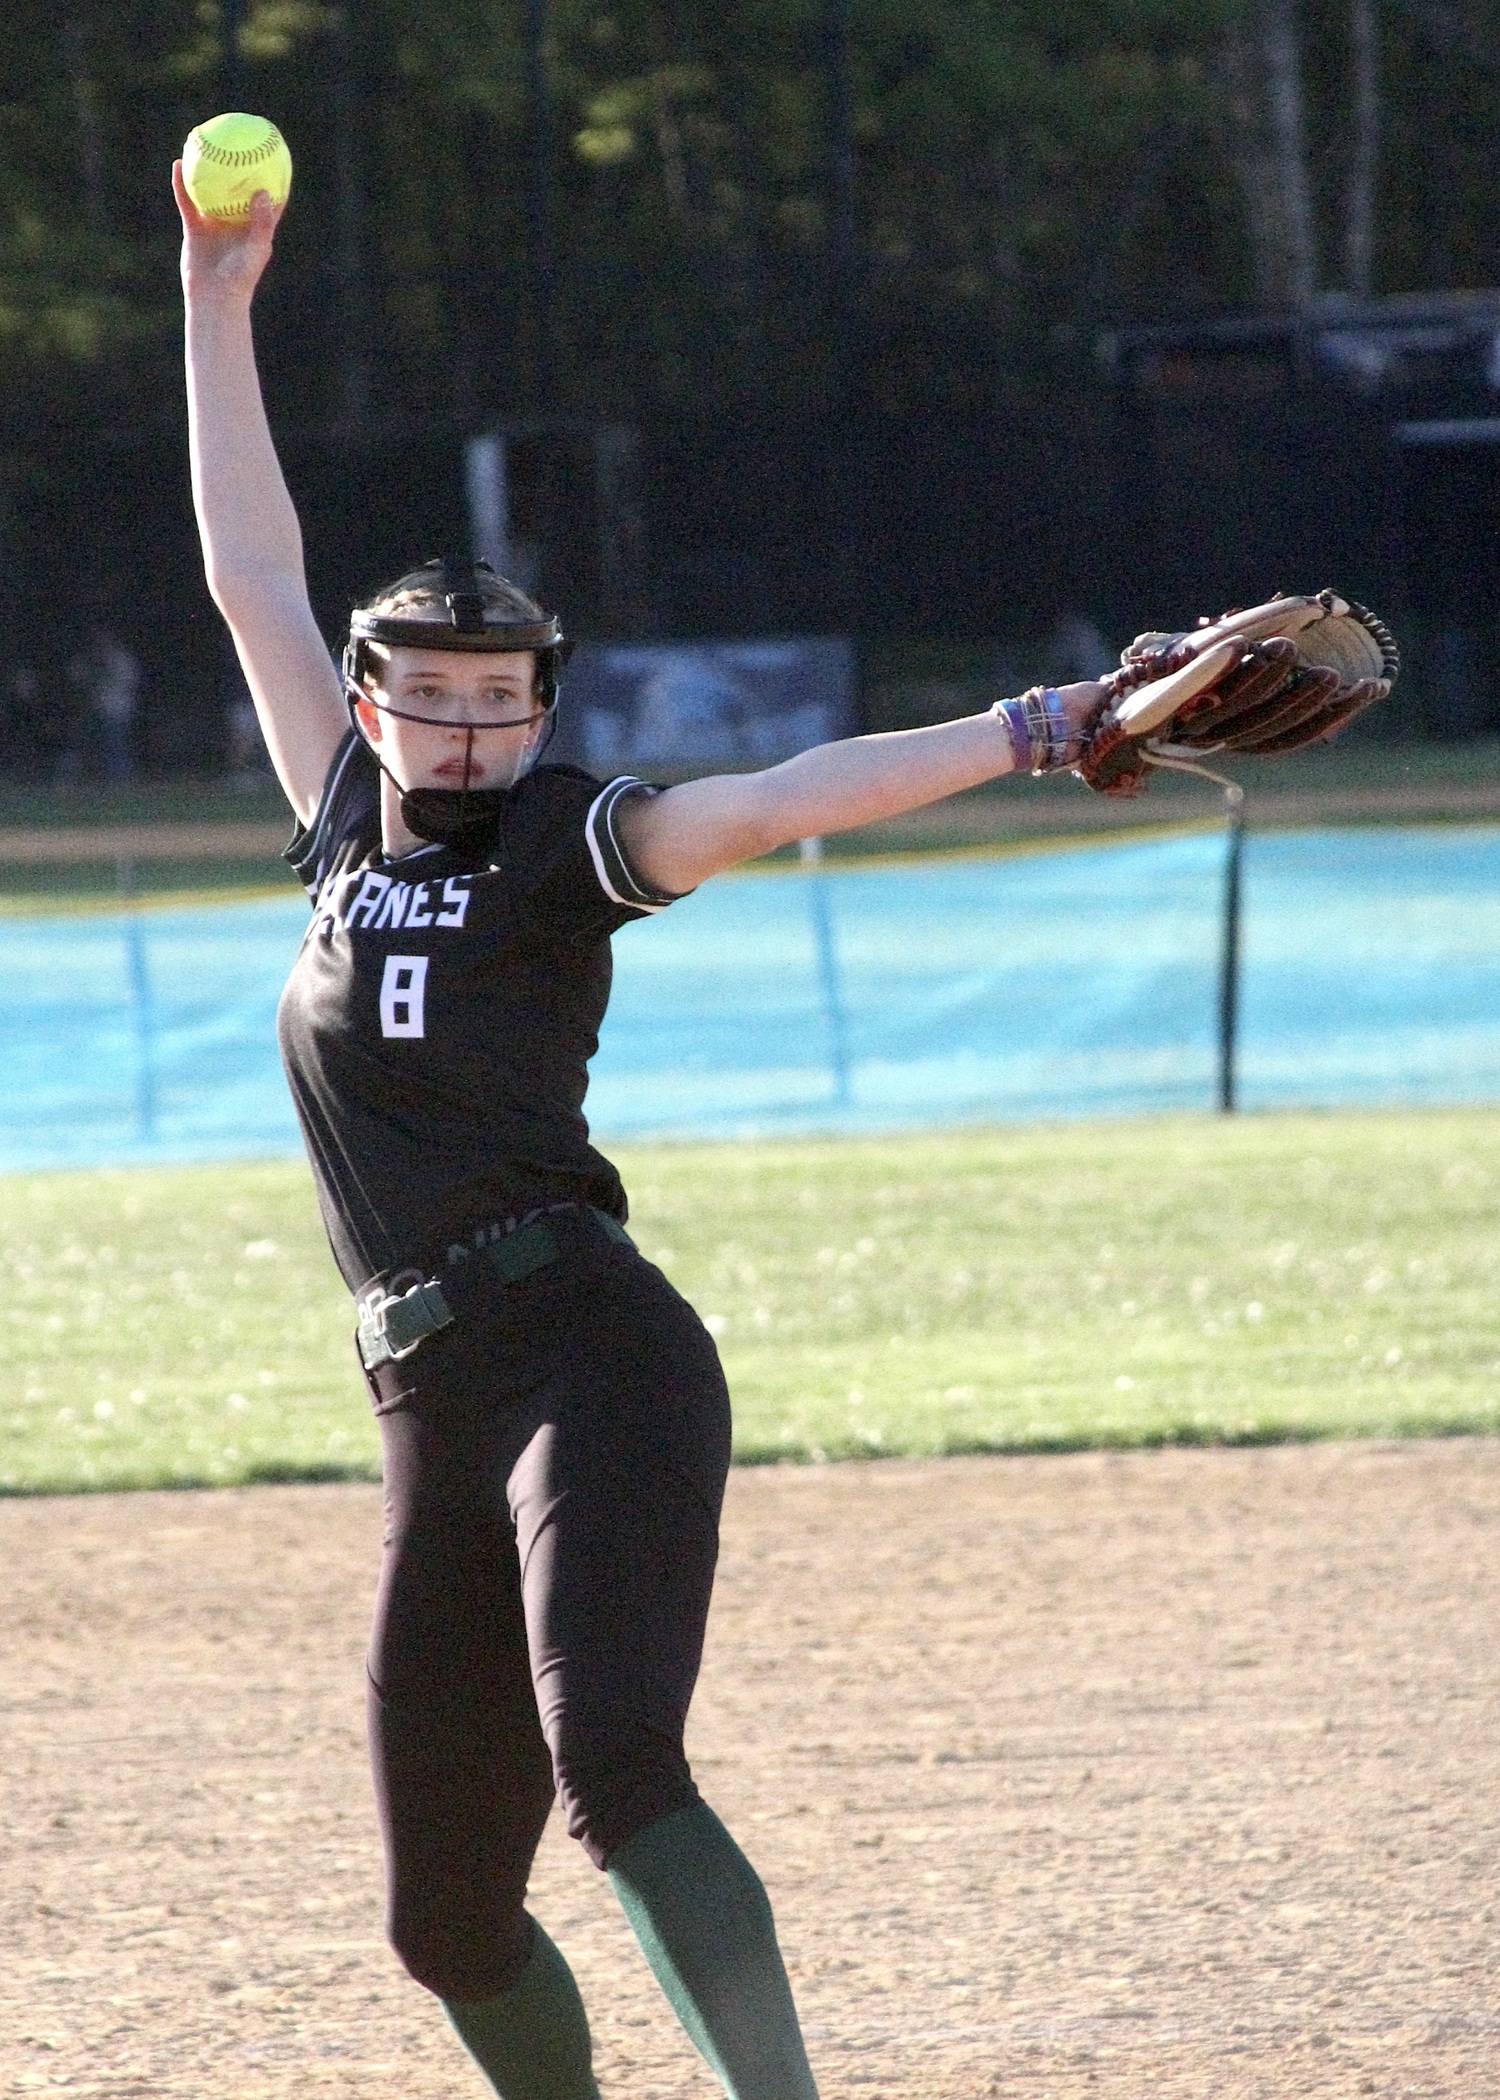 Senior pitcher Rosalie Judd closes out the game against Rocky Point. DESIRÉE KEEGAN